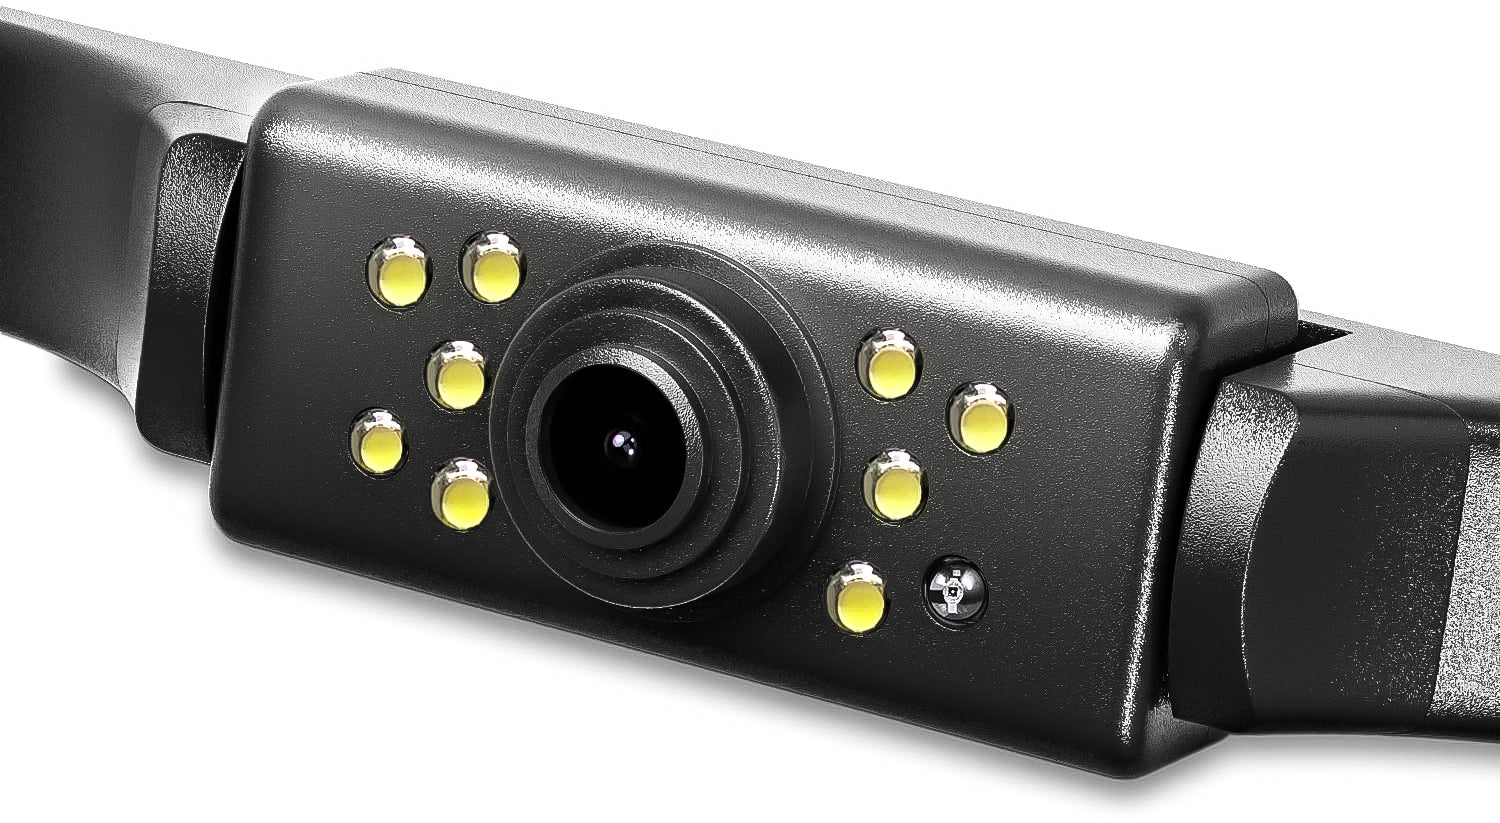 Car Rear View  Universal Vehicle Reversing Backup Camera System for RV, Truck, Bus.